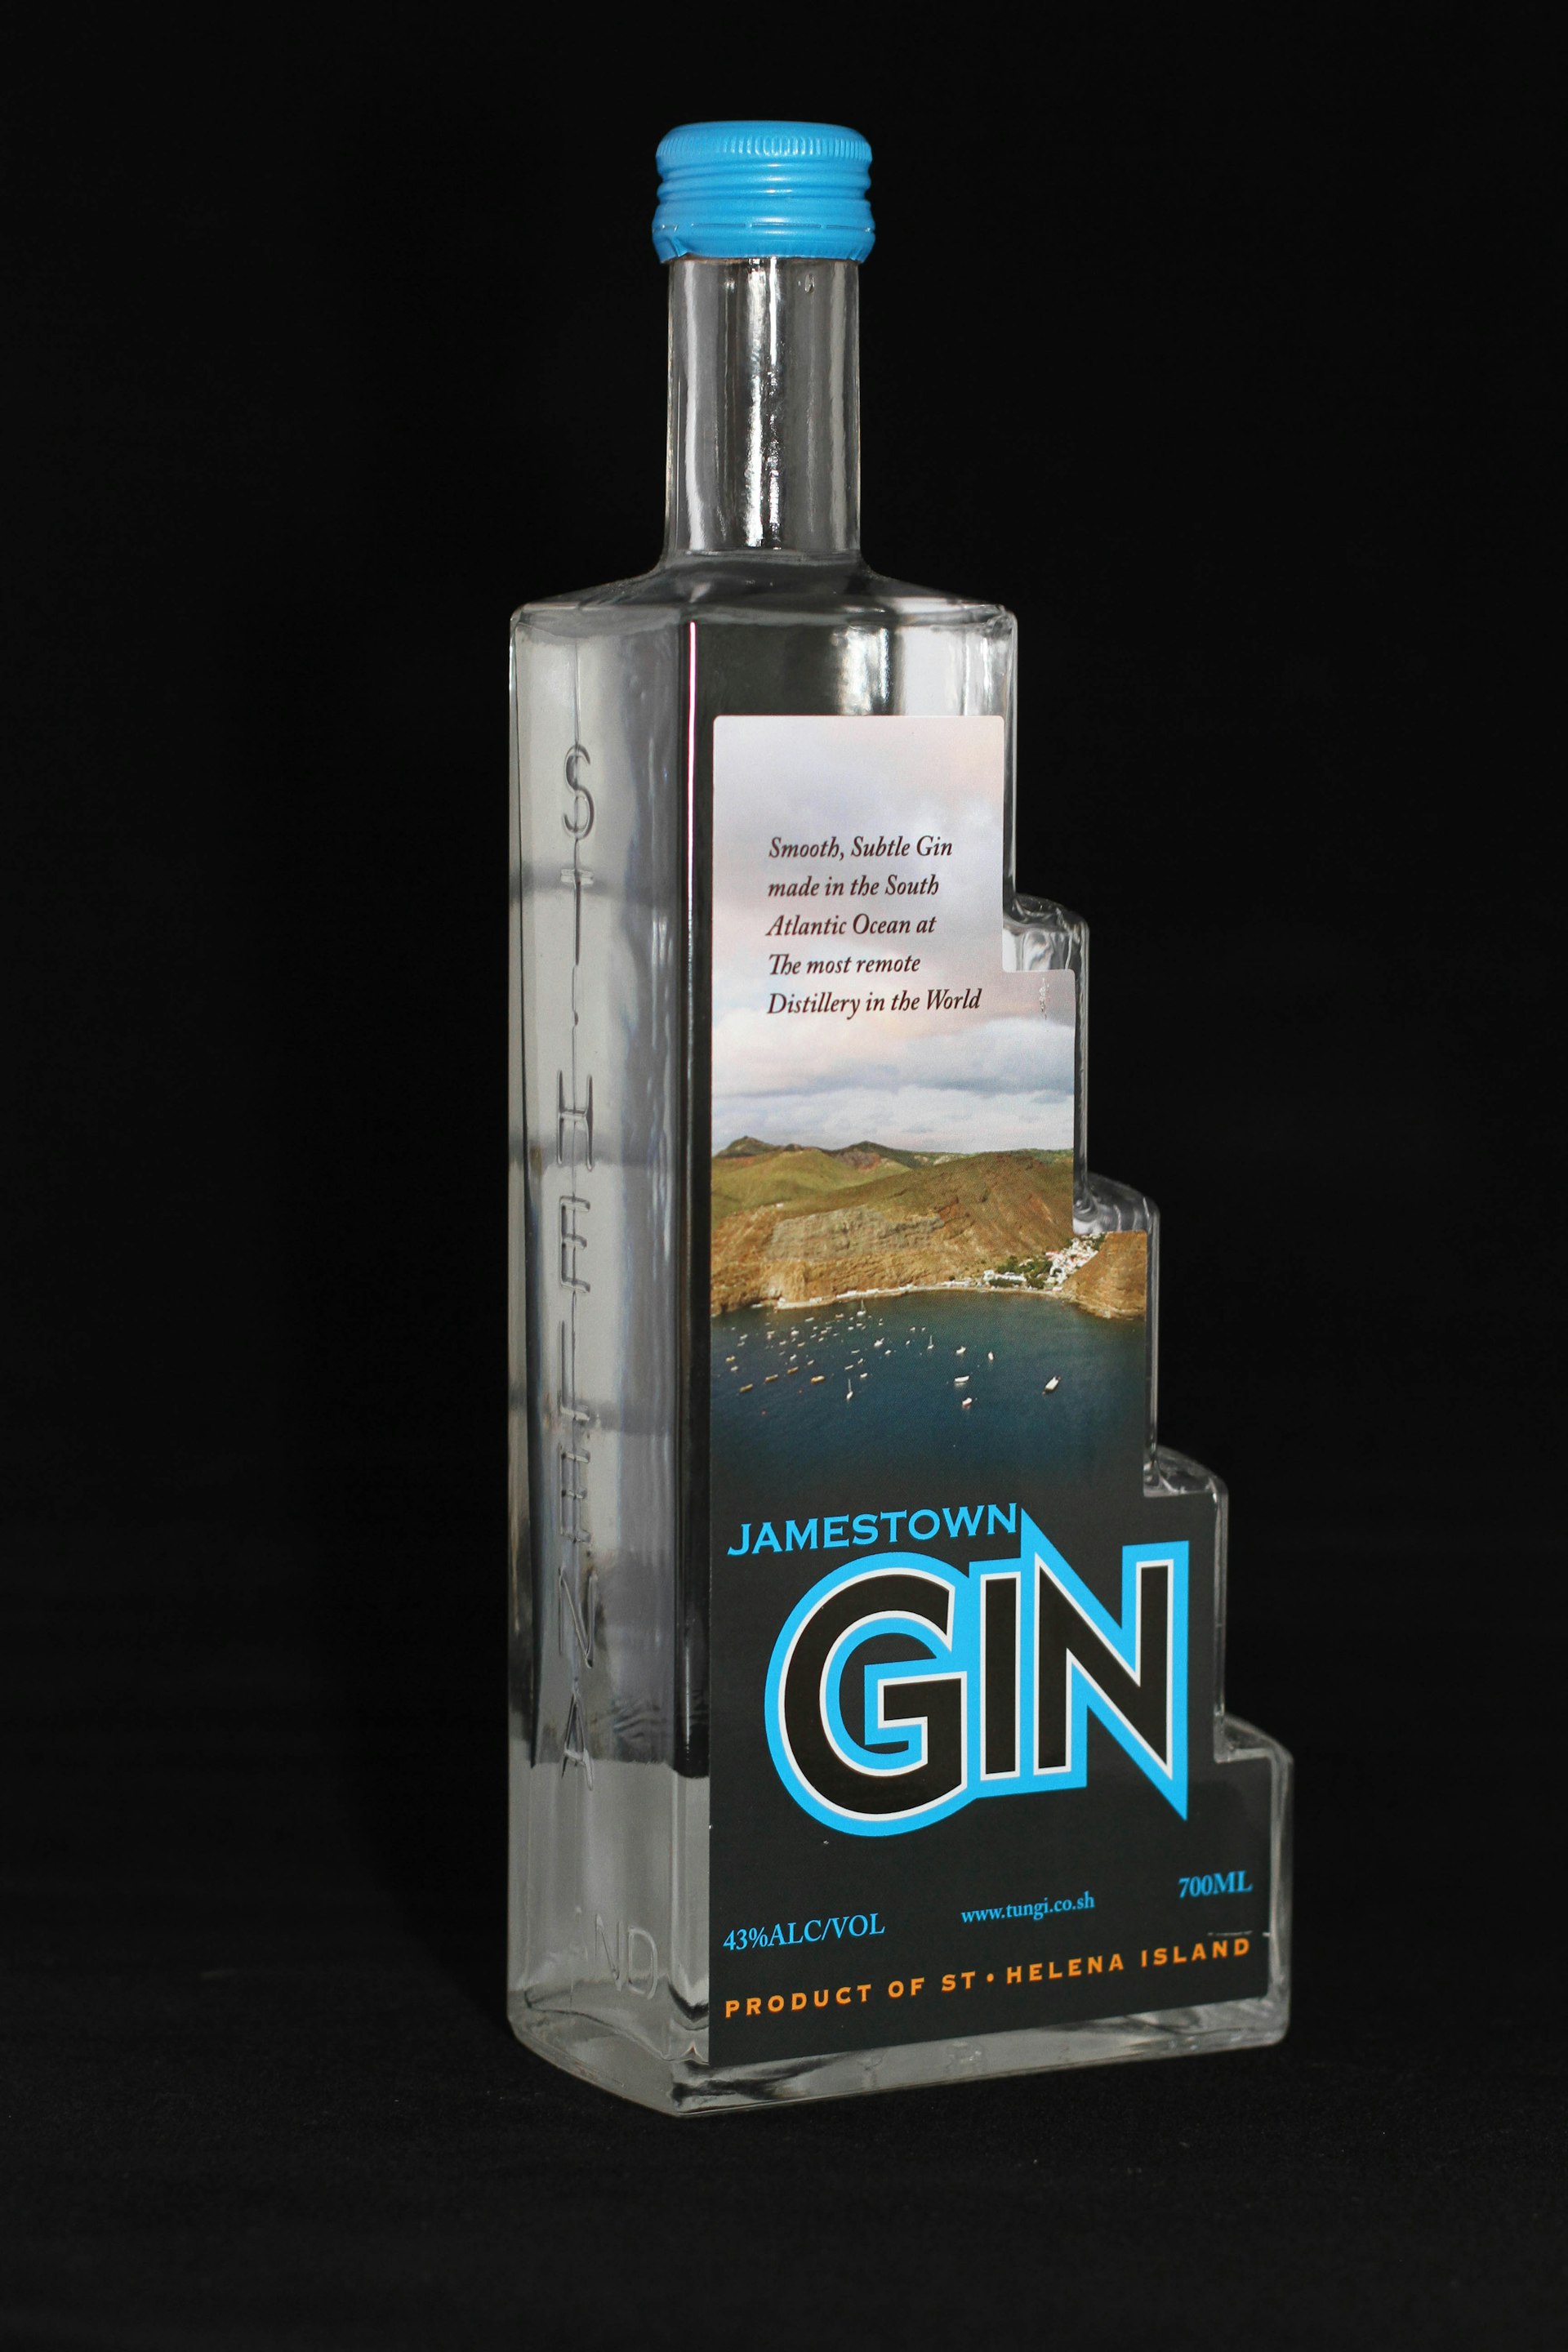 A promotional shot of the step-shaped bottle of Jamestown Gin.